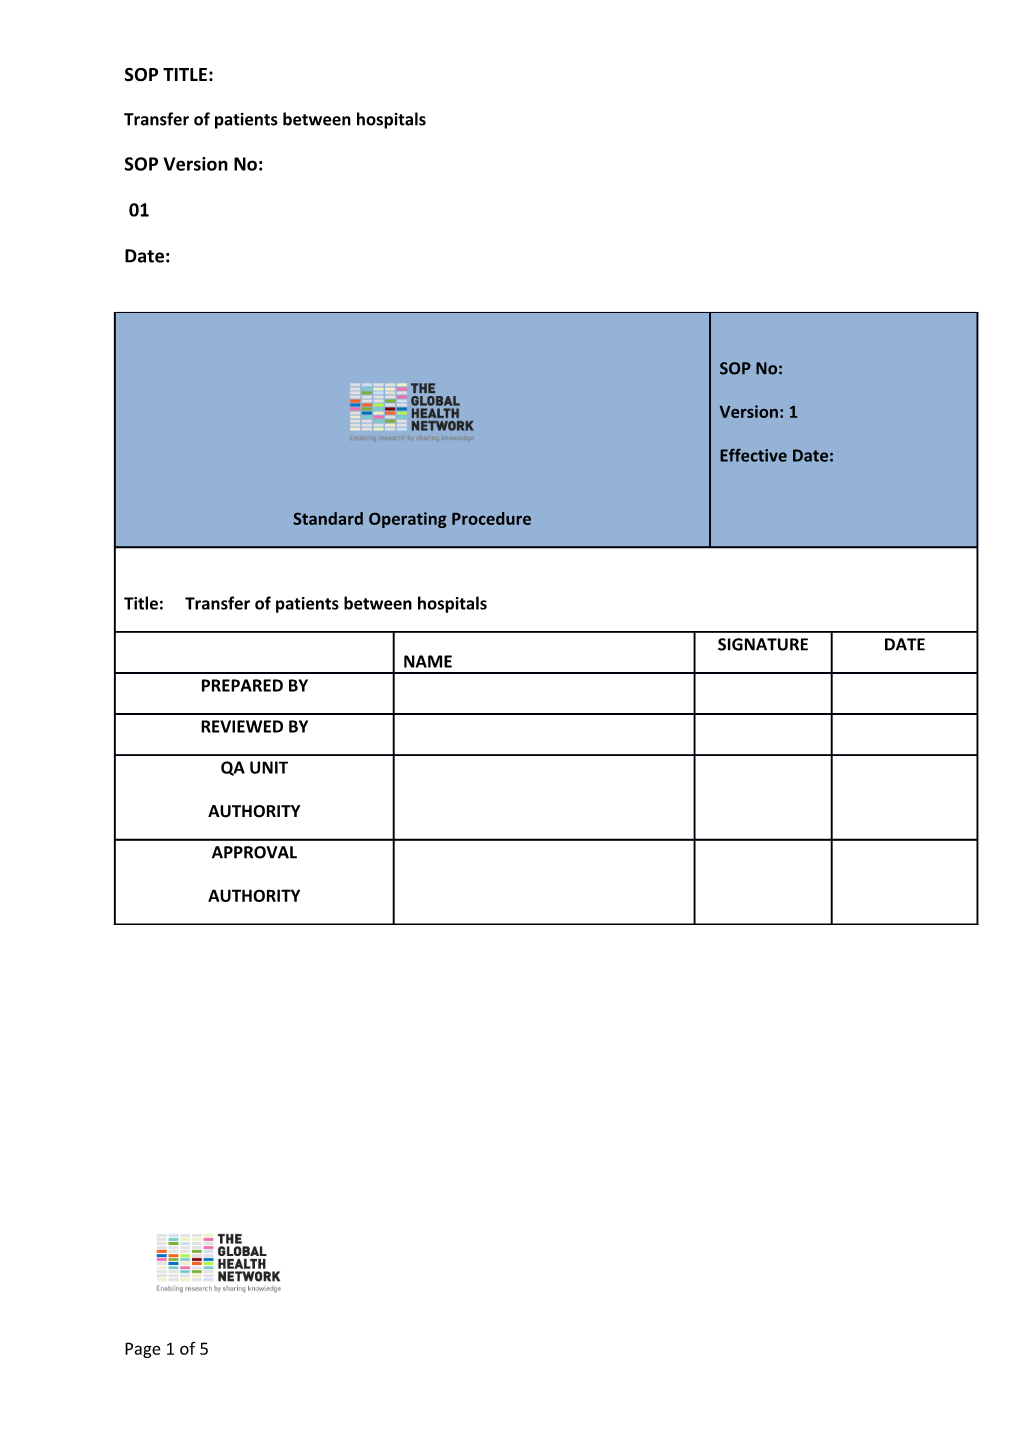 17.3.1 Documents Required for Transfer of Patients